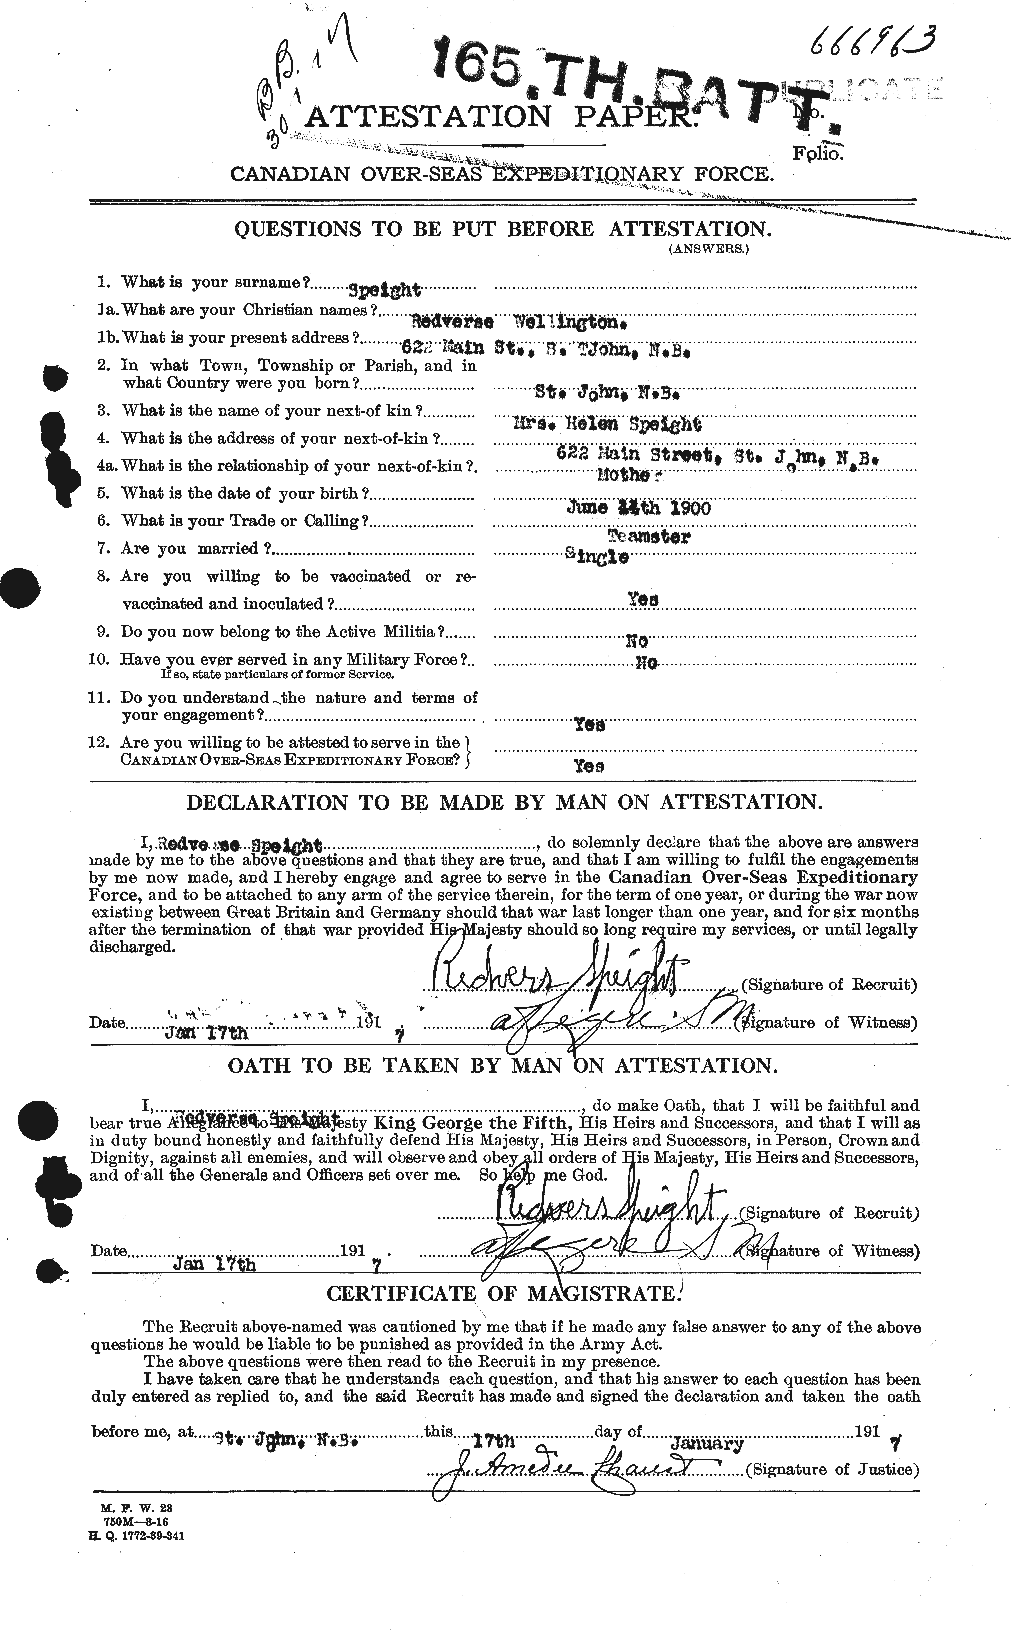 Personnel Records of the First World War - CEF 110064a